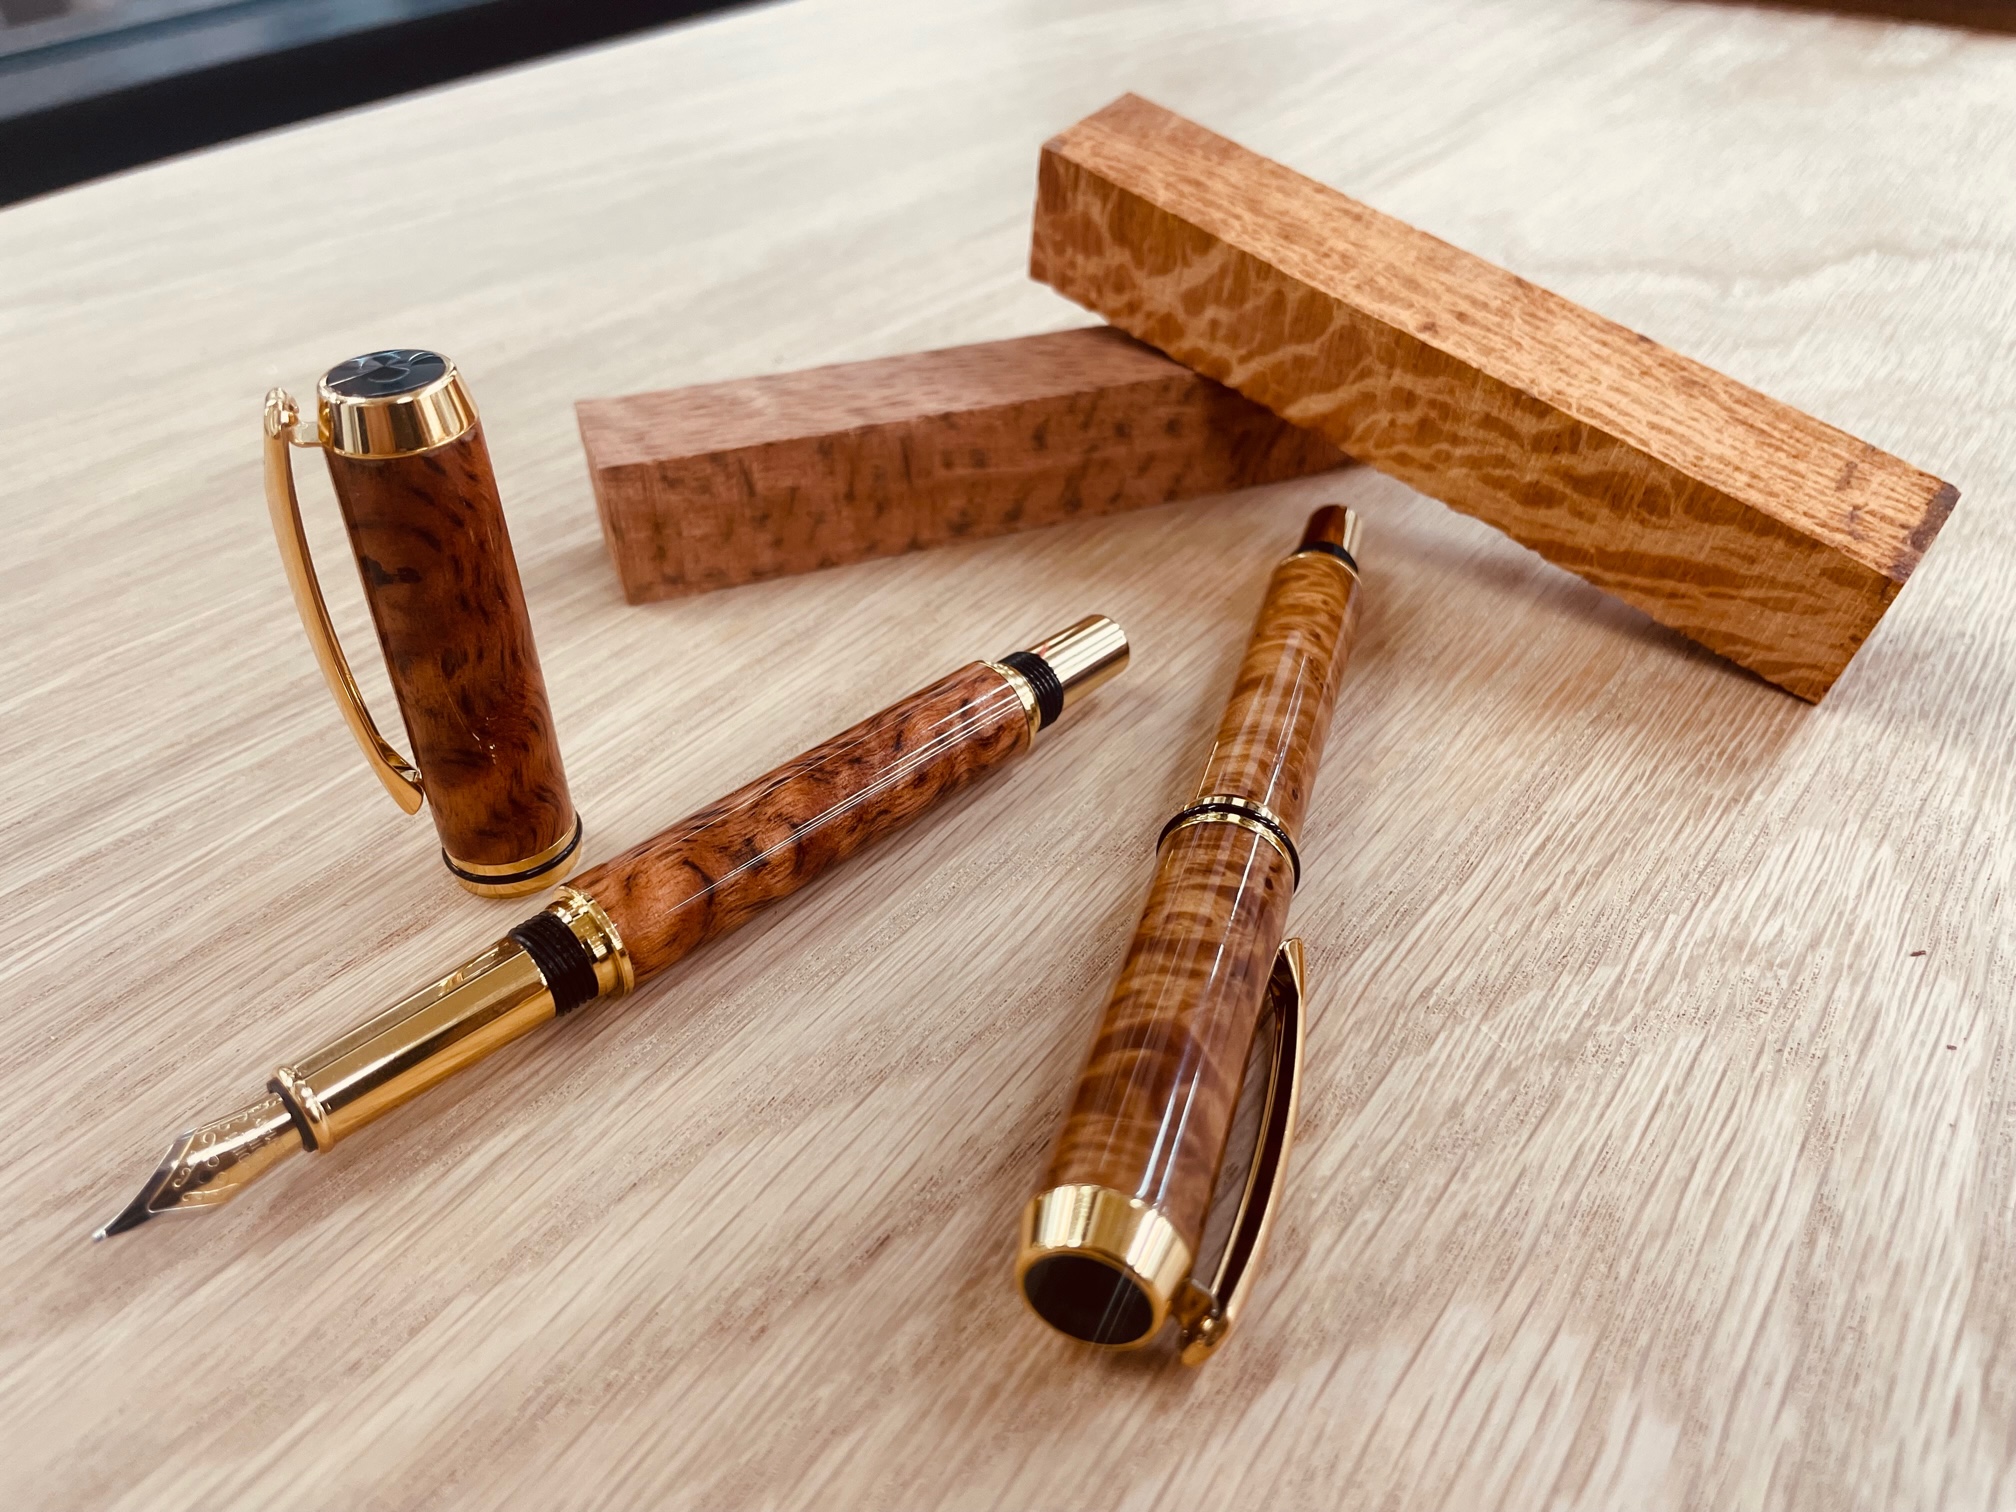 Introduction To Pen Turning